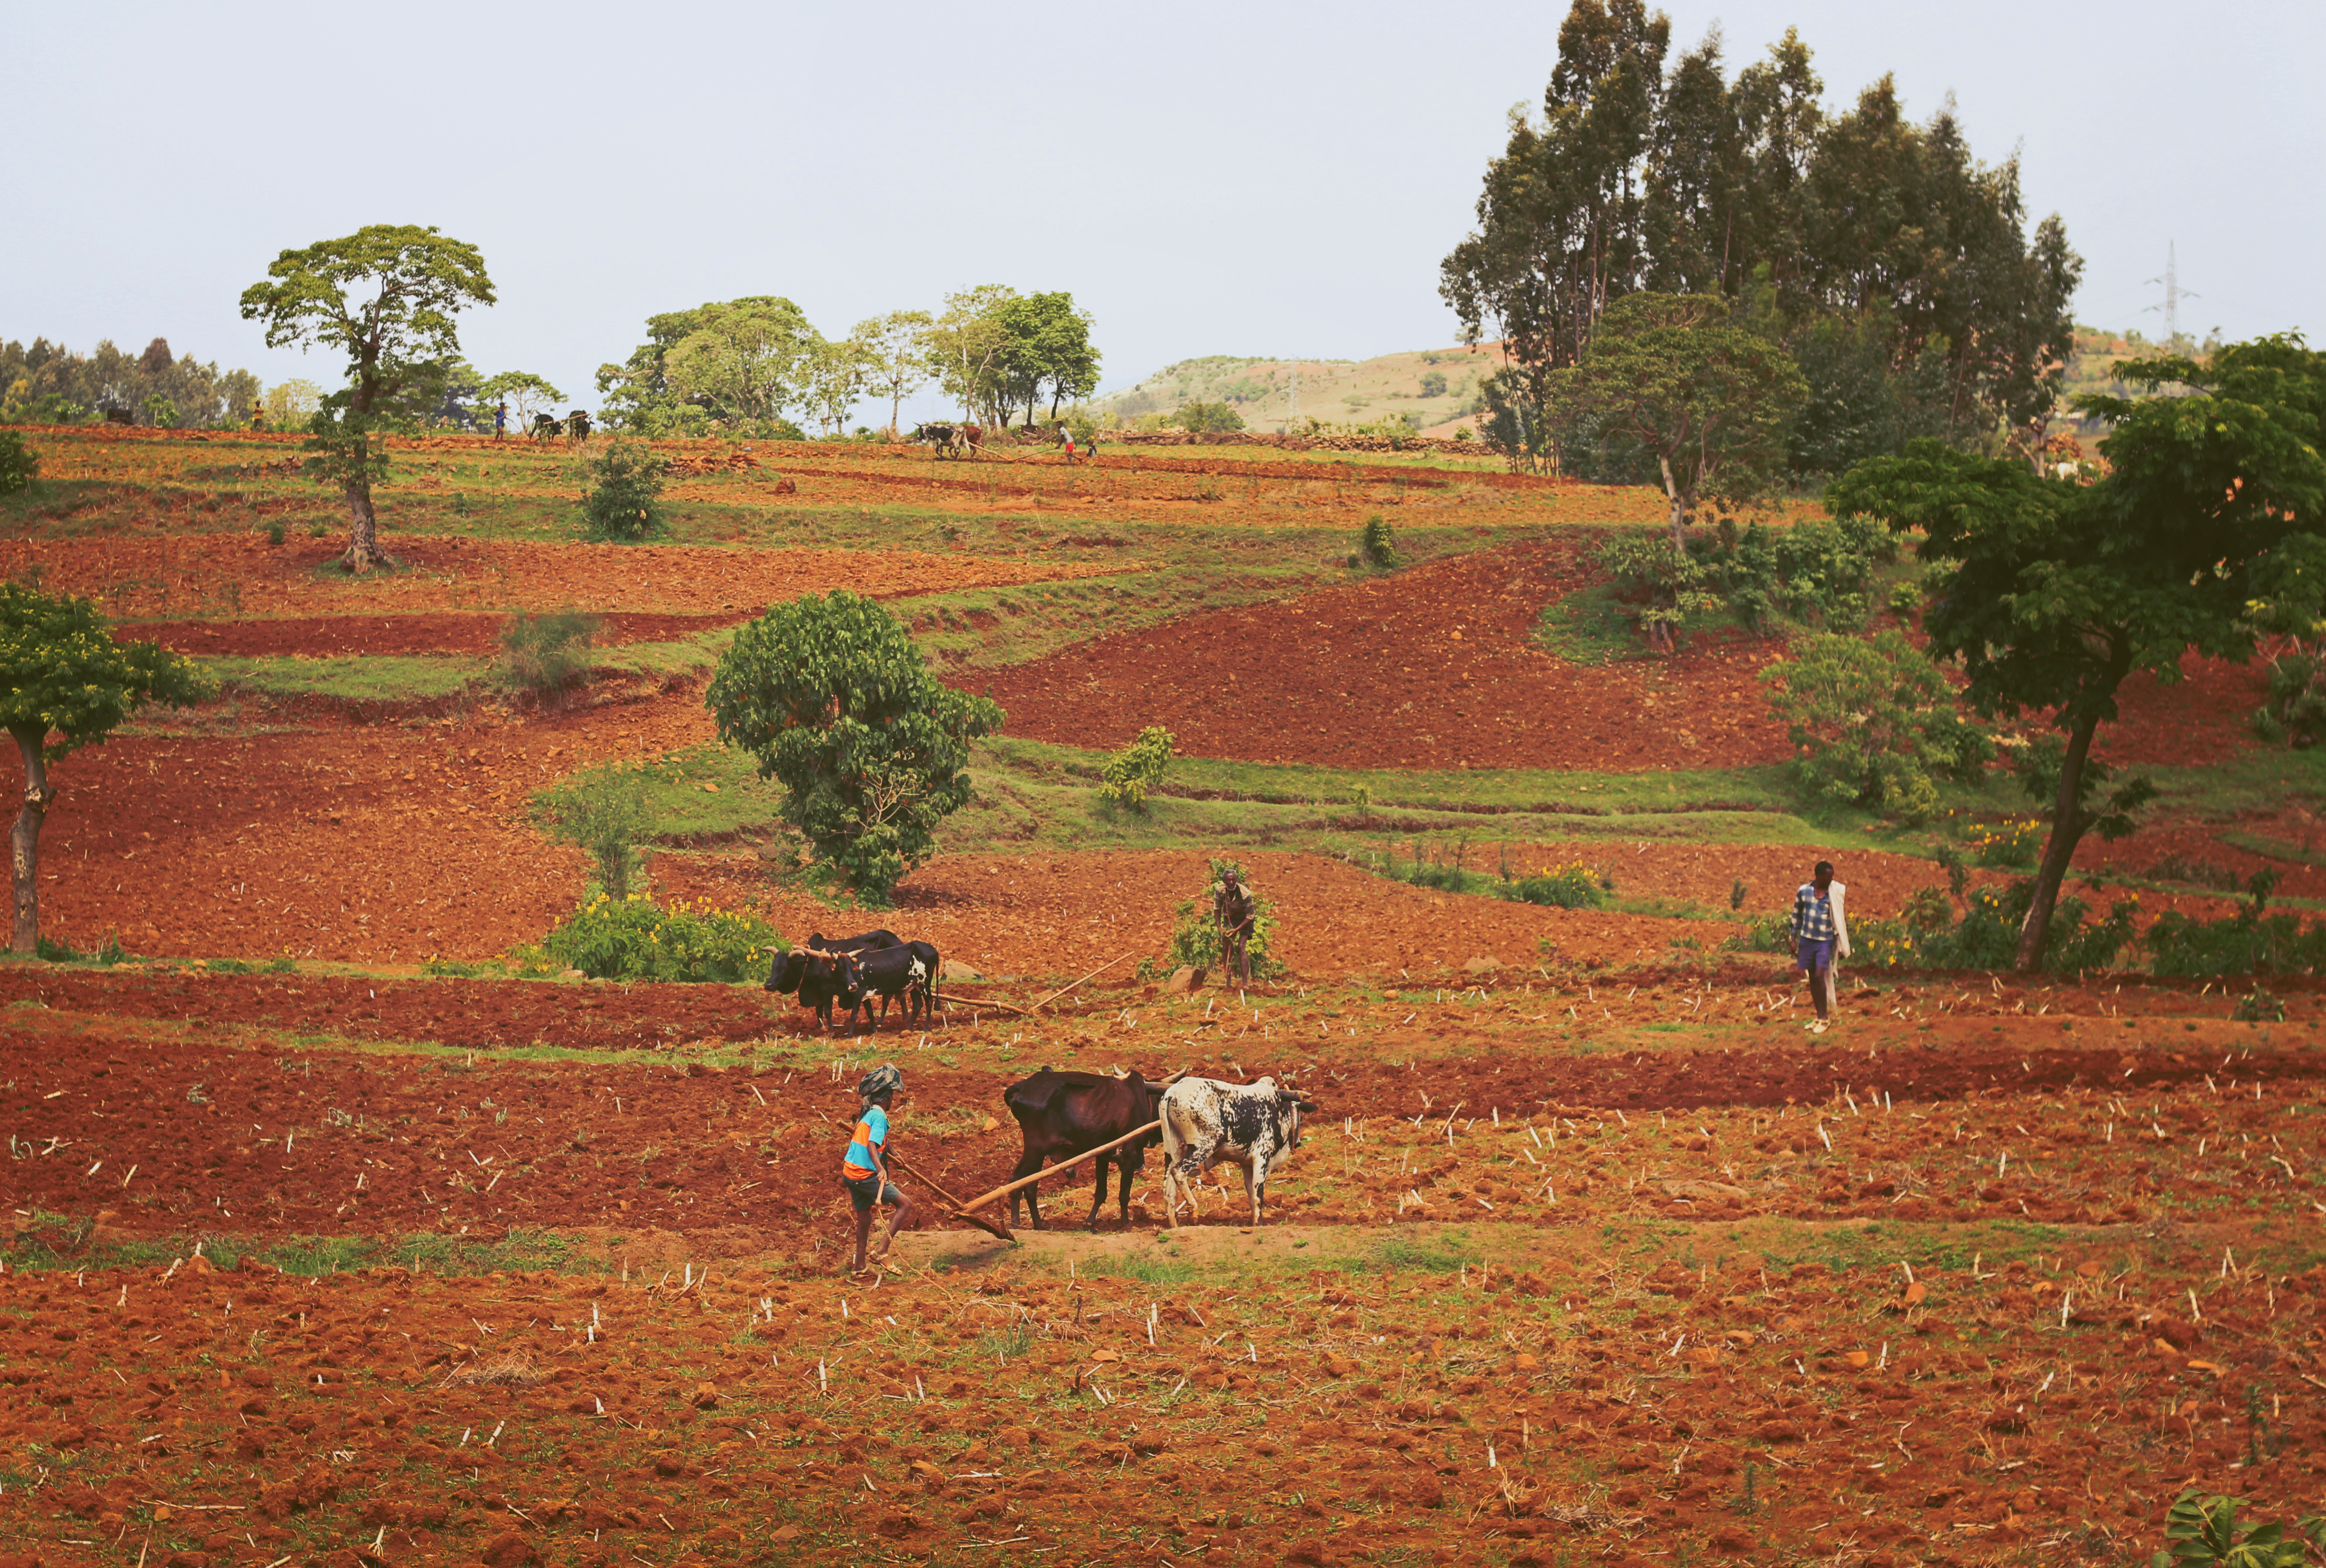 Farmers ploughing the land in Aba Gerima, Ethiopia; Photo Credit: Alice Chautard/REACH